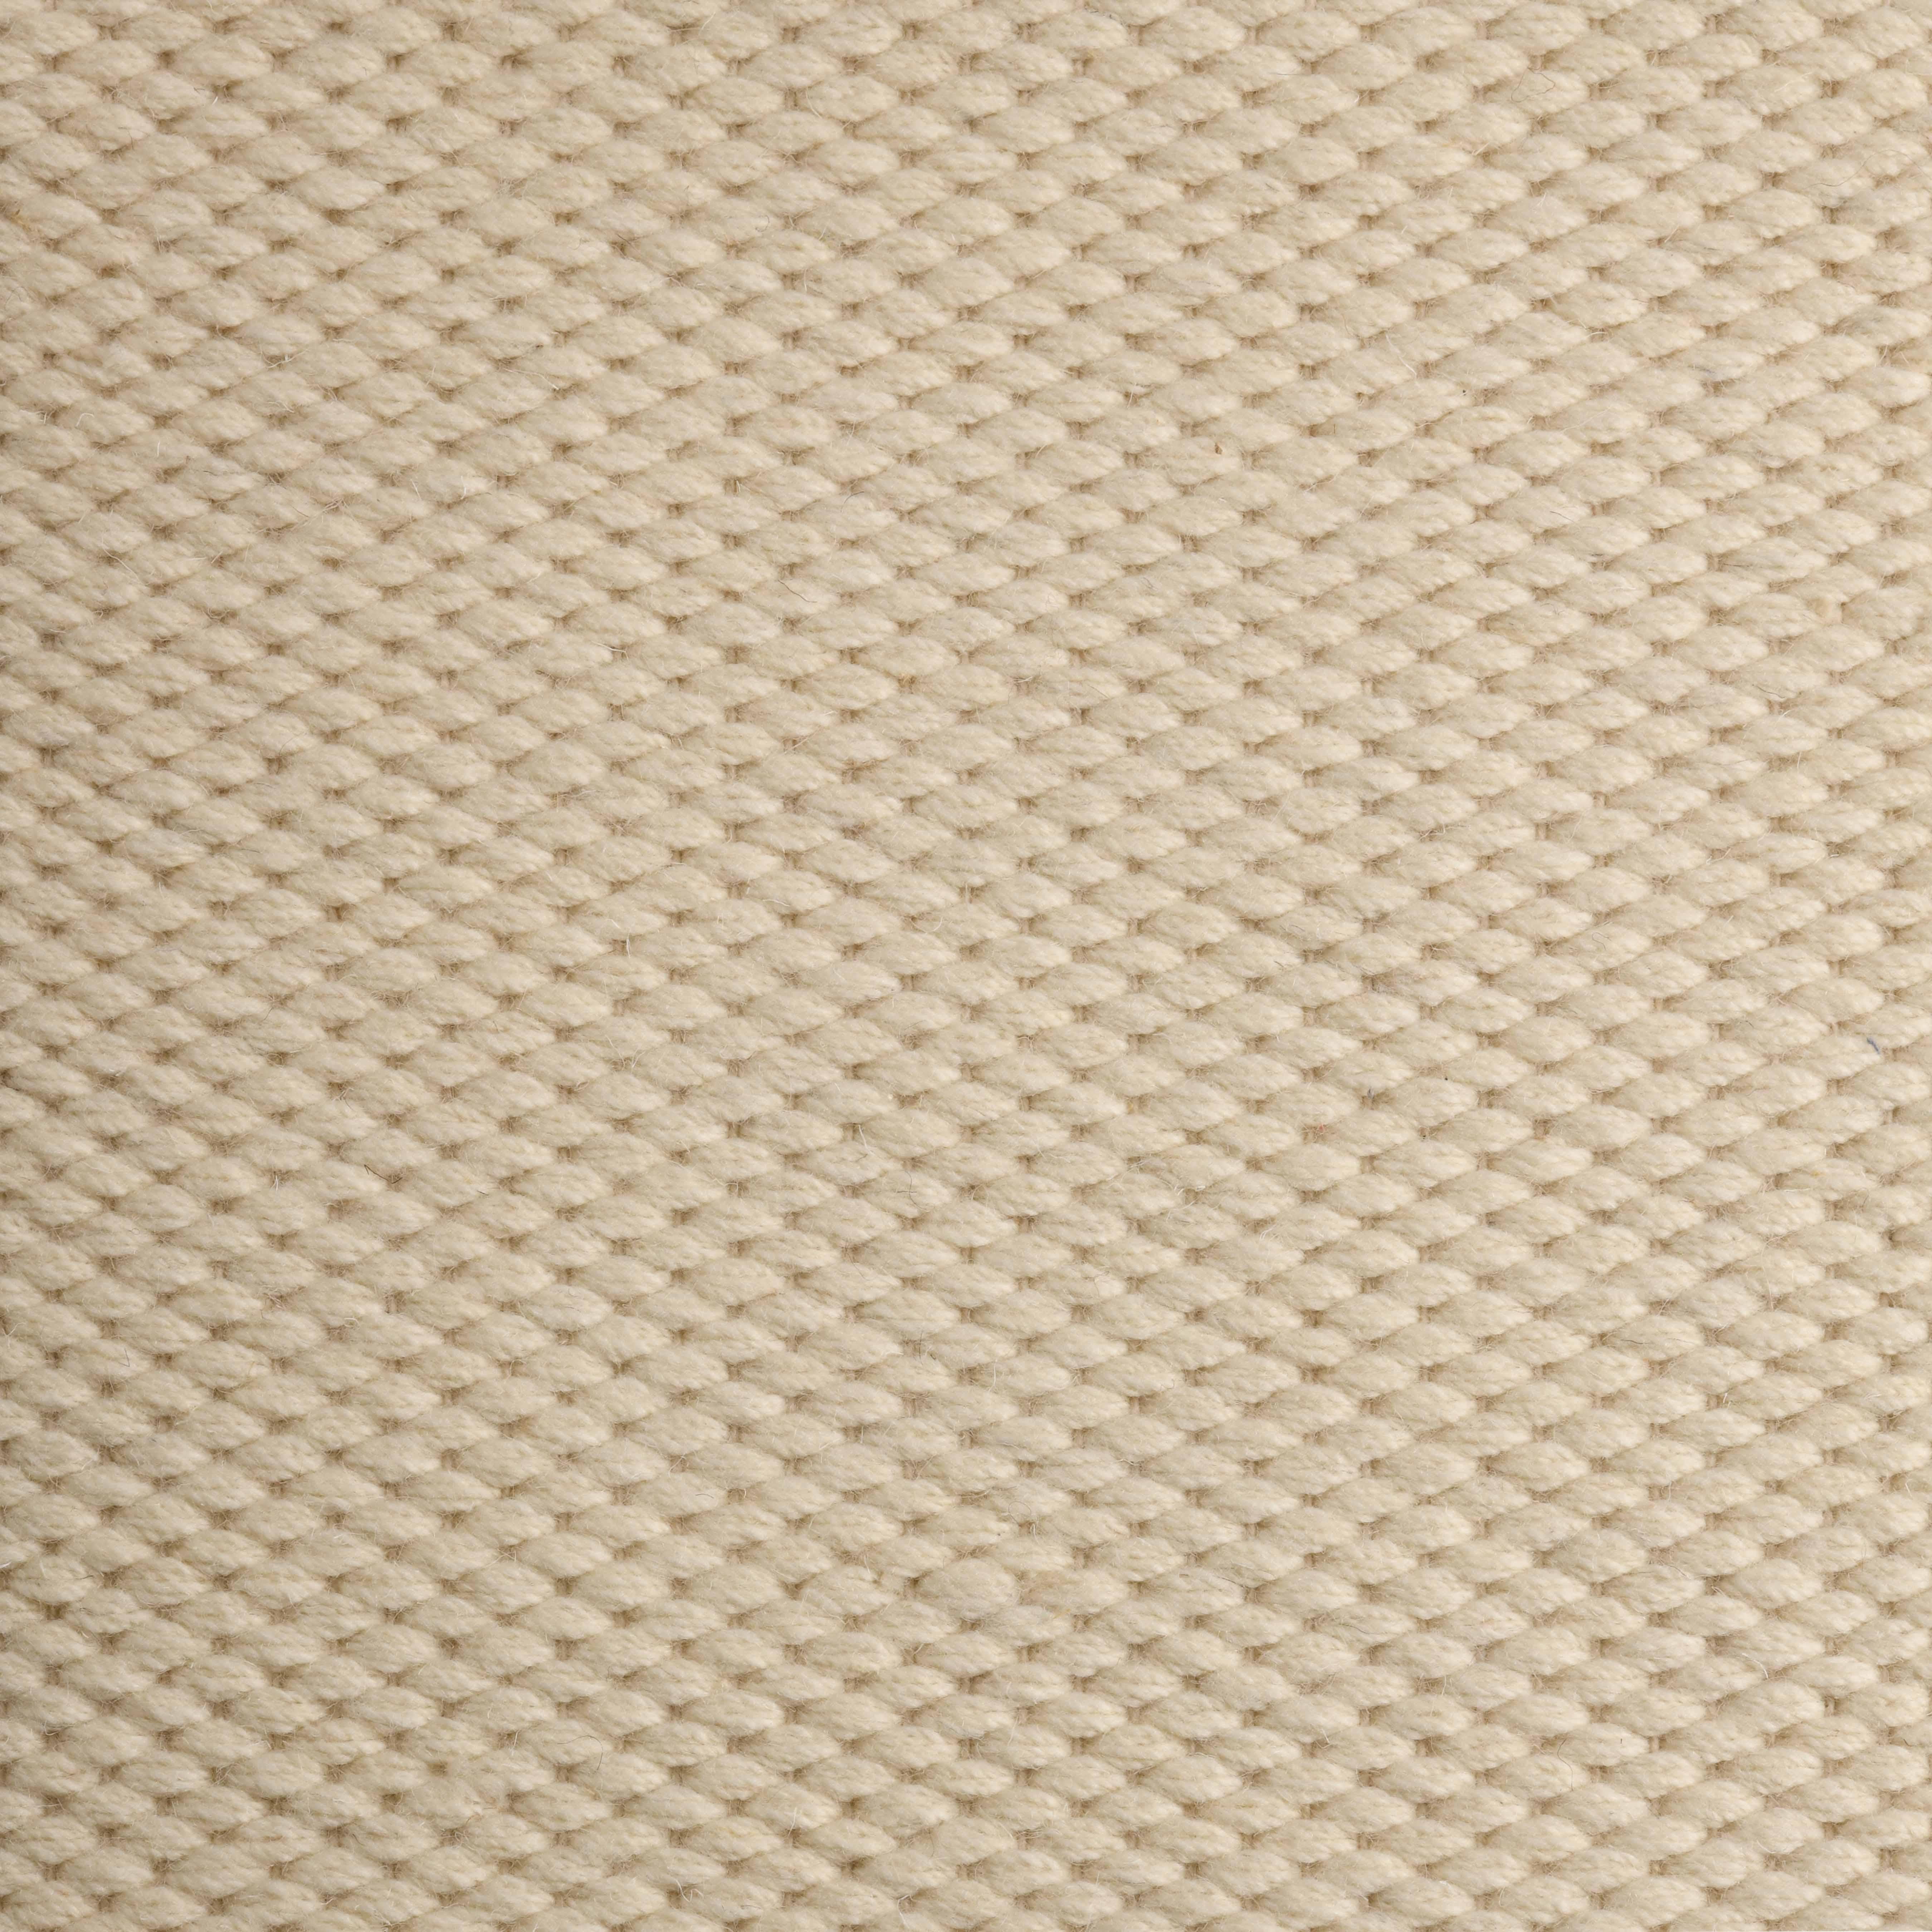 Quies, Ivory, Handwoven, New Zealand and Mediterranean wools, 8' x 10' For Sale